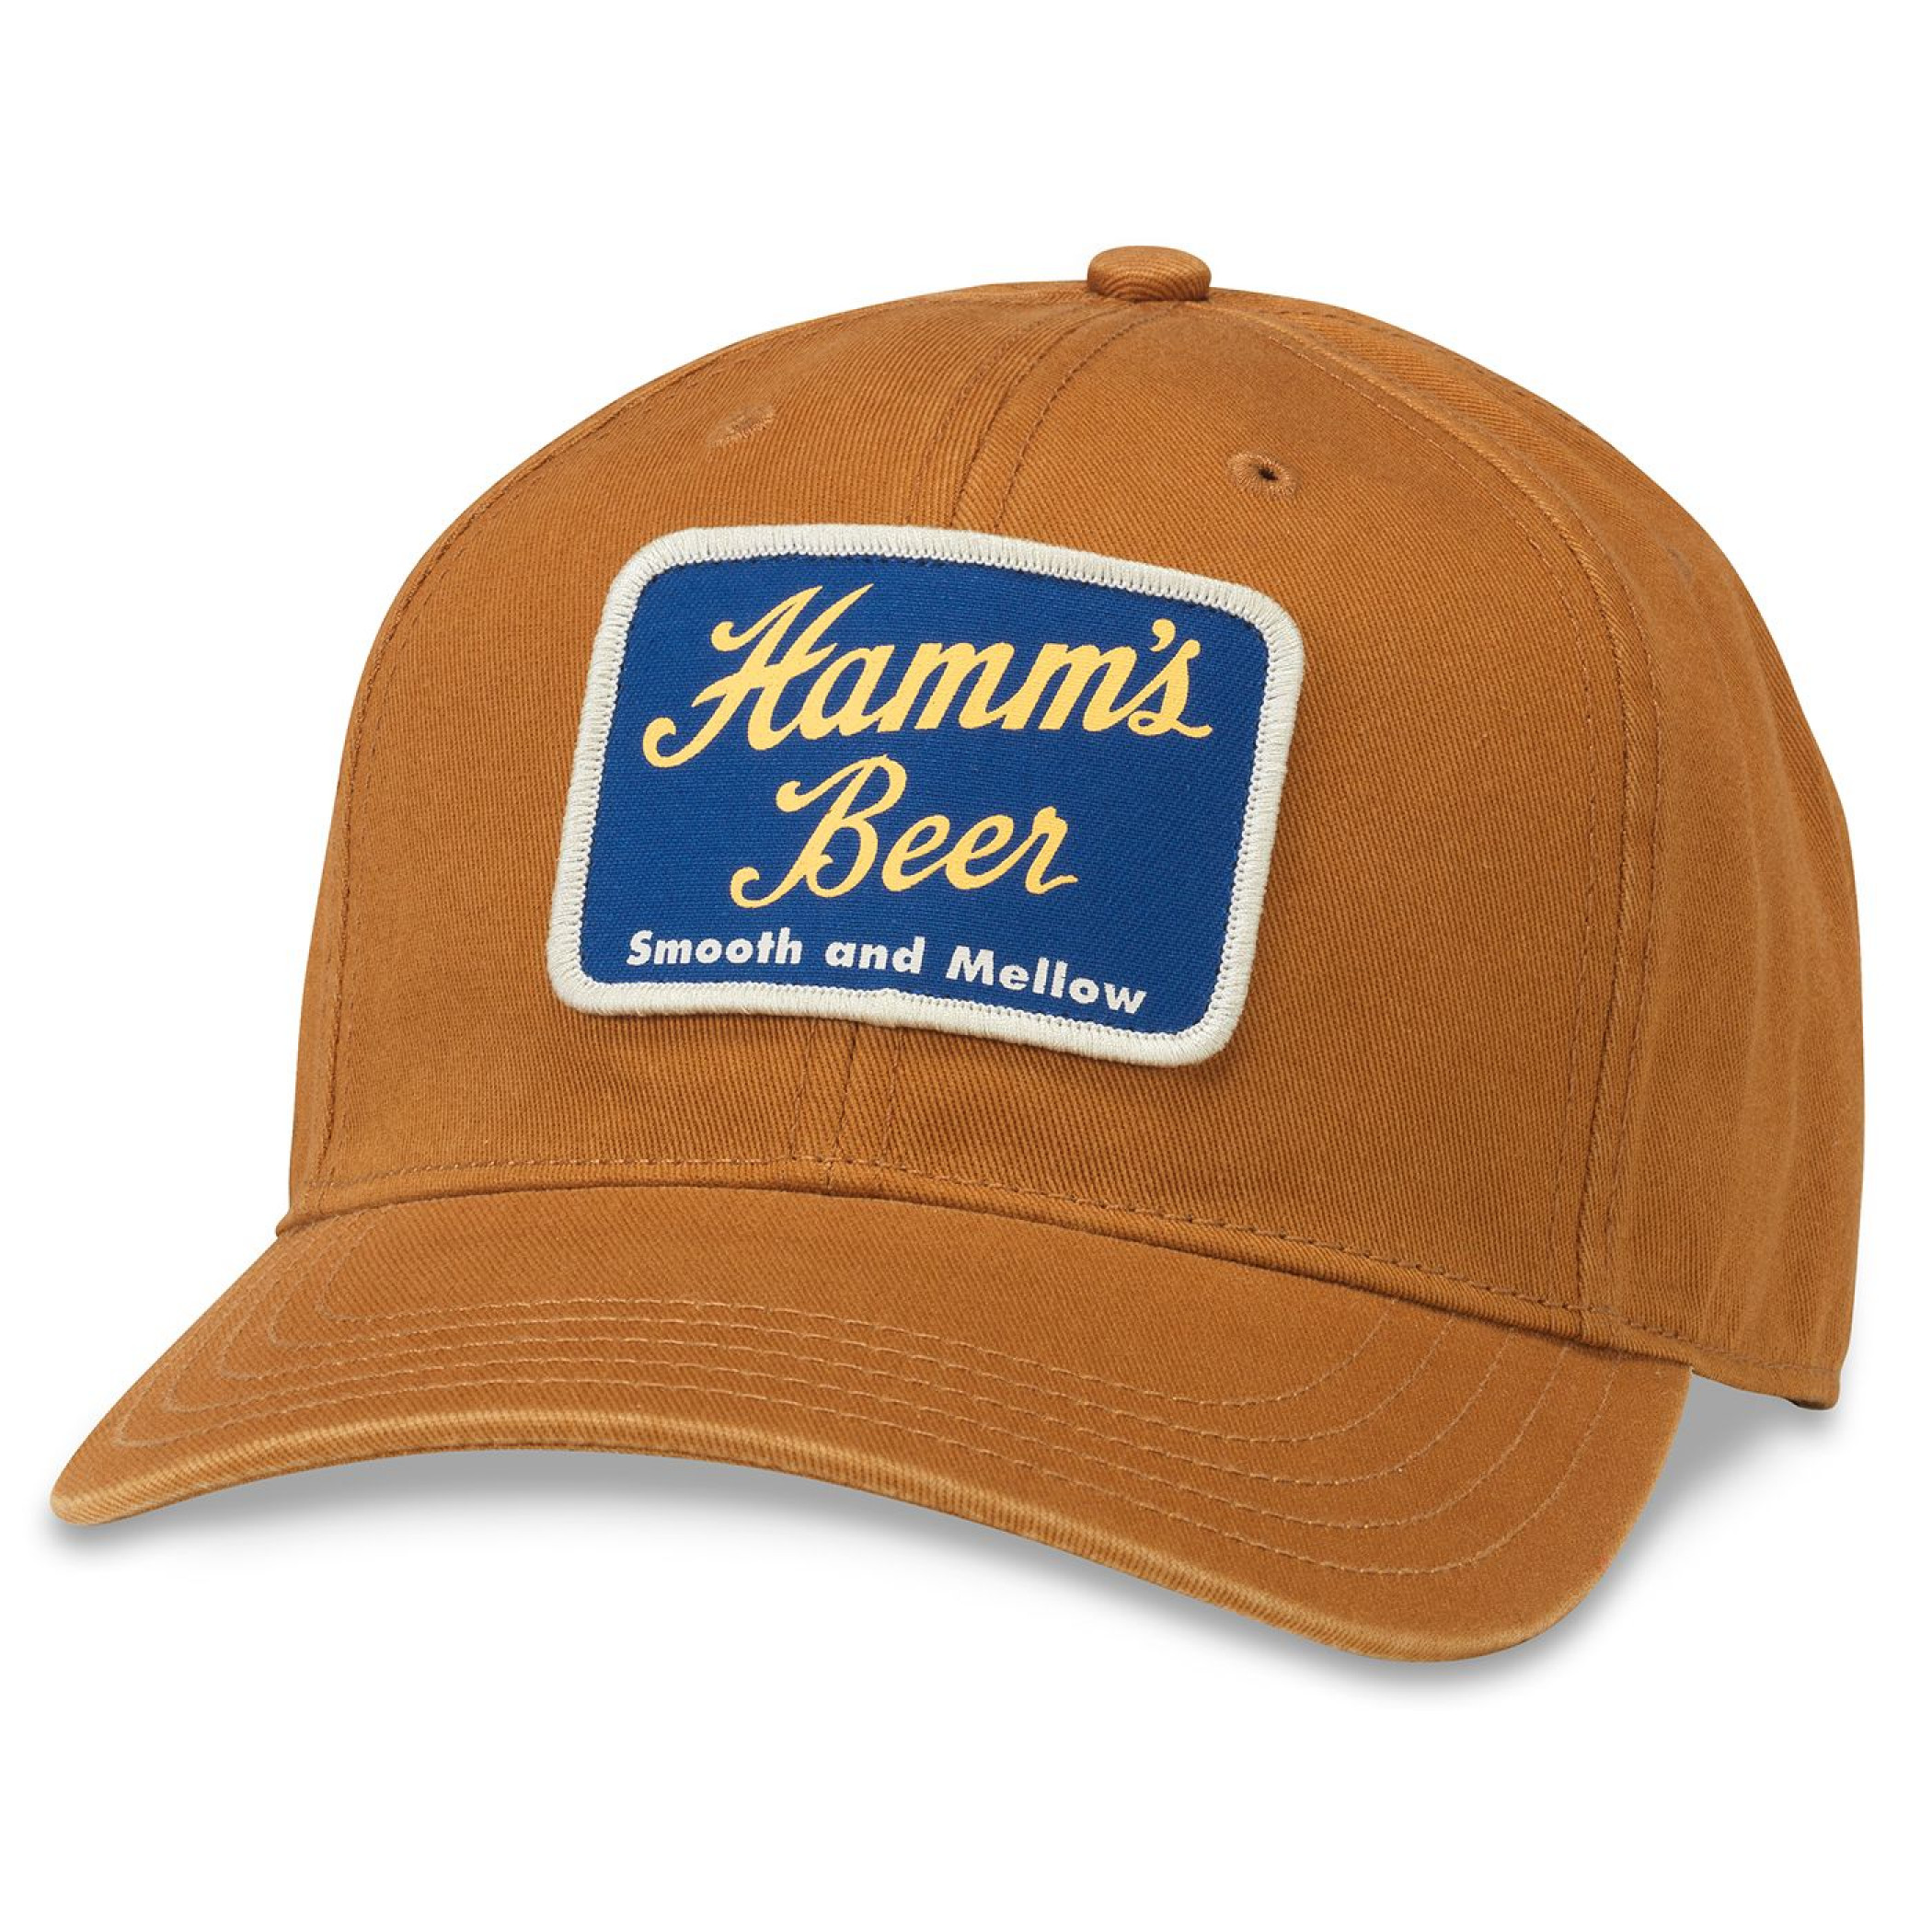 Hamm's Beer Smooth and Mellow Patch Rounded Bill Adjustable Hat